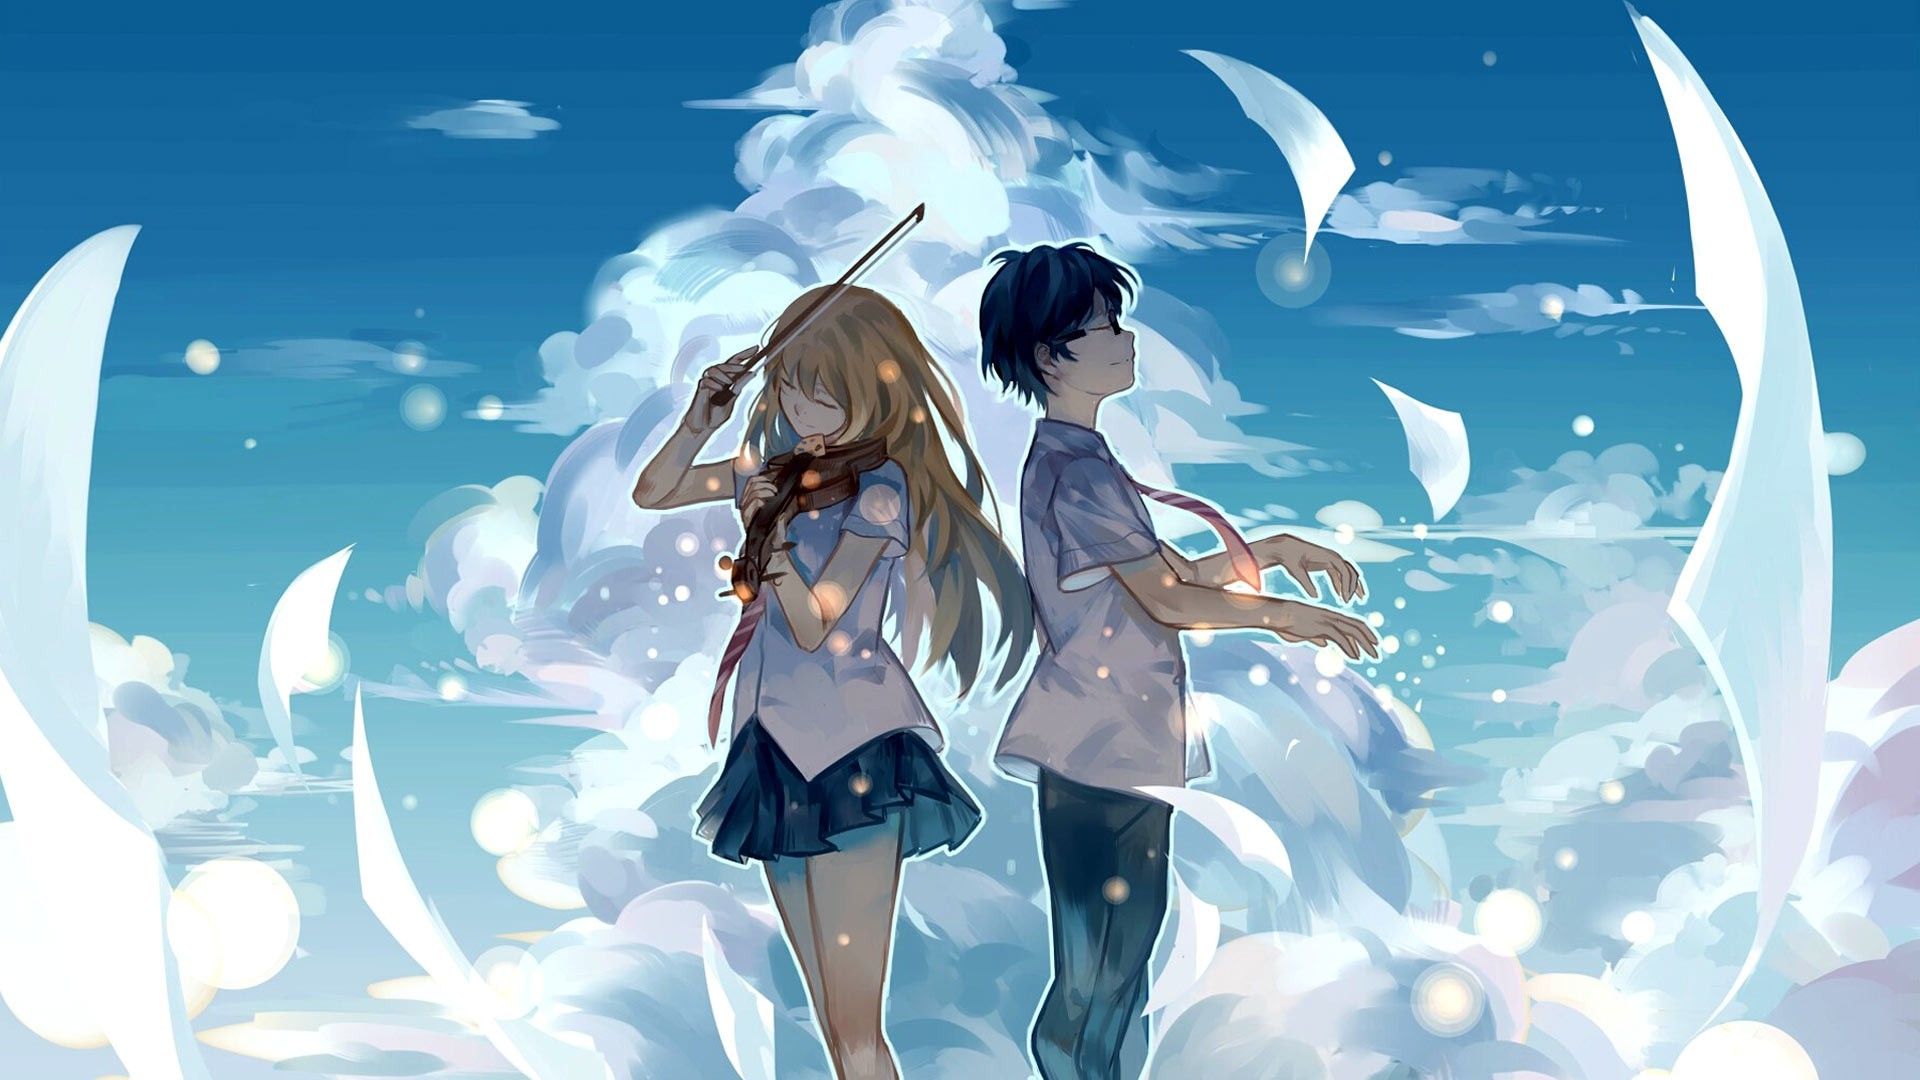 Love Anime Couples Wallpapers